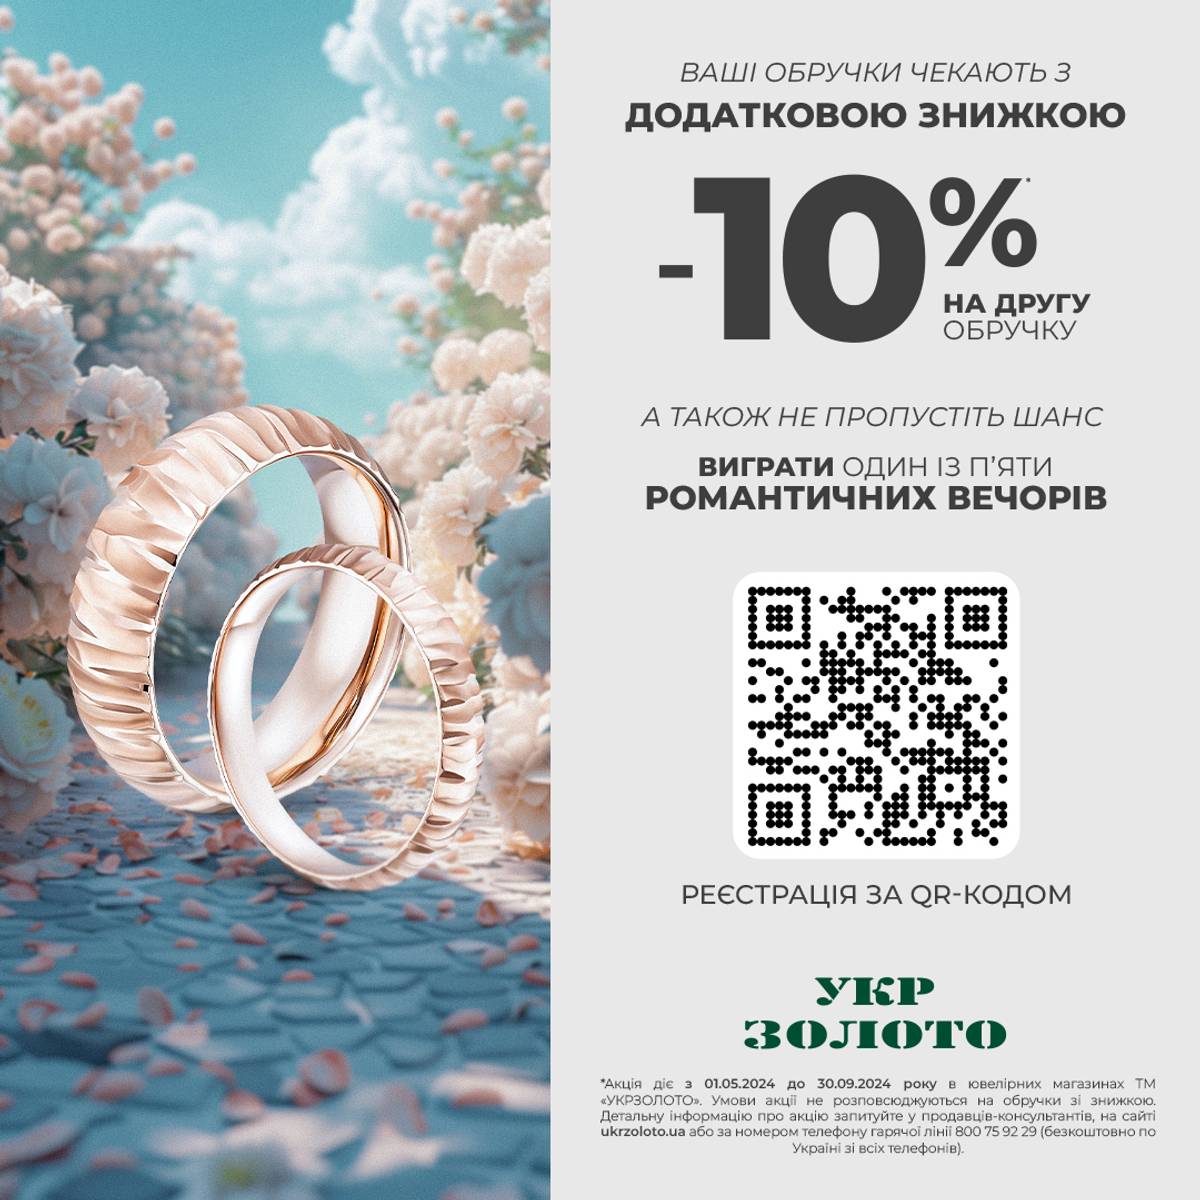 A romantic offer from "Ukrzoloto"!